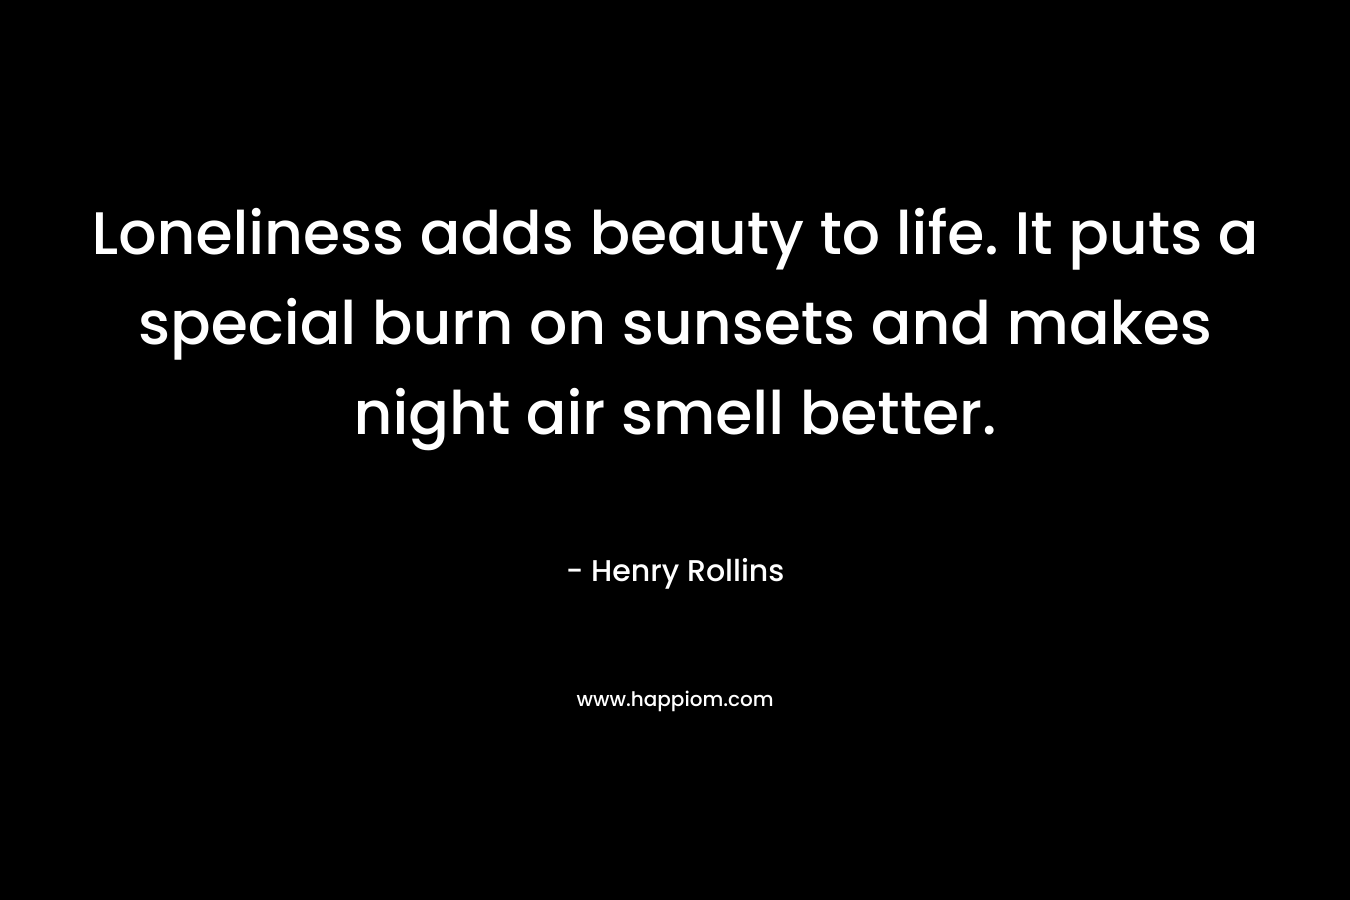 Loneliness adds beauty to life. It puts a special burn on sunsets and makes night air smell better. – Henry Rollins